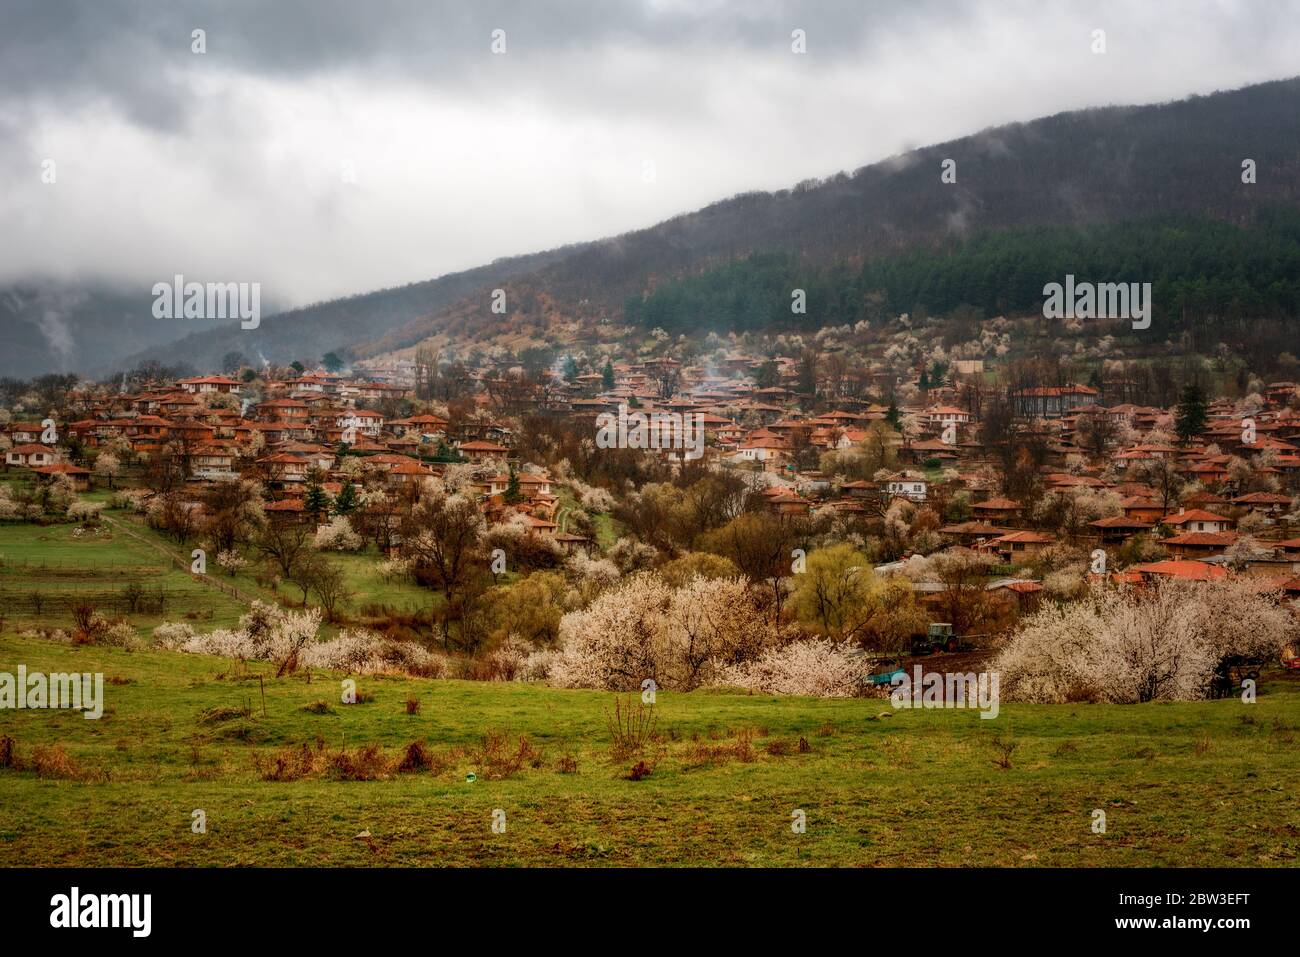 Spring view at Zheravna, Bulgaria. Architectural reserve of rustic houses and narrow cobbled streets from the Bulgarian national revival period. Stock Photo